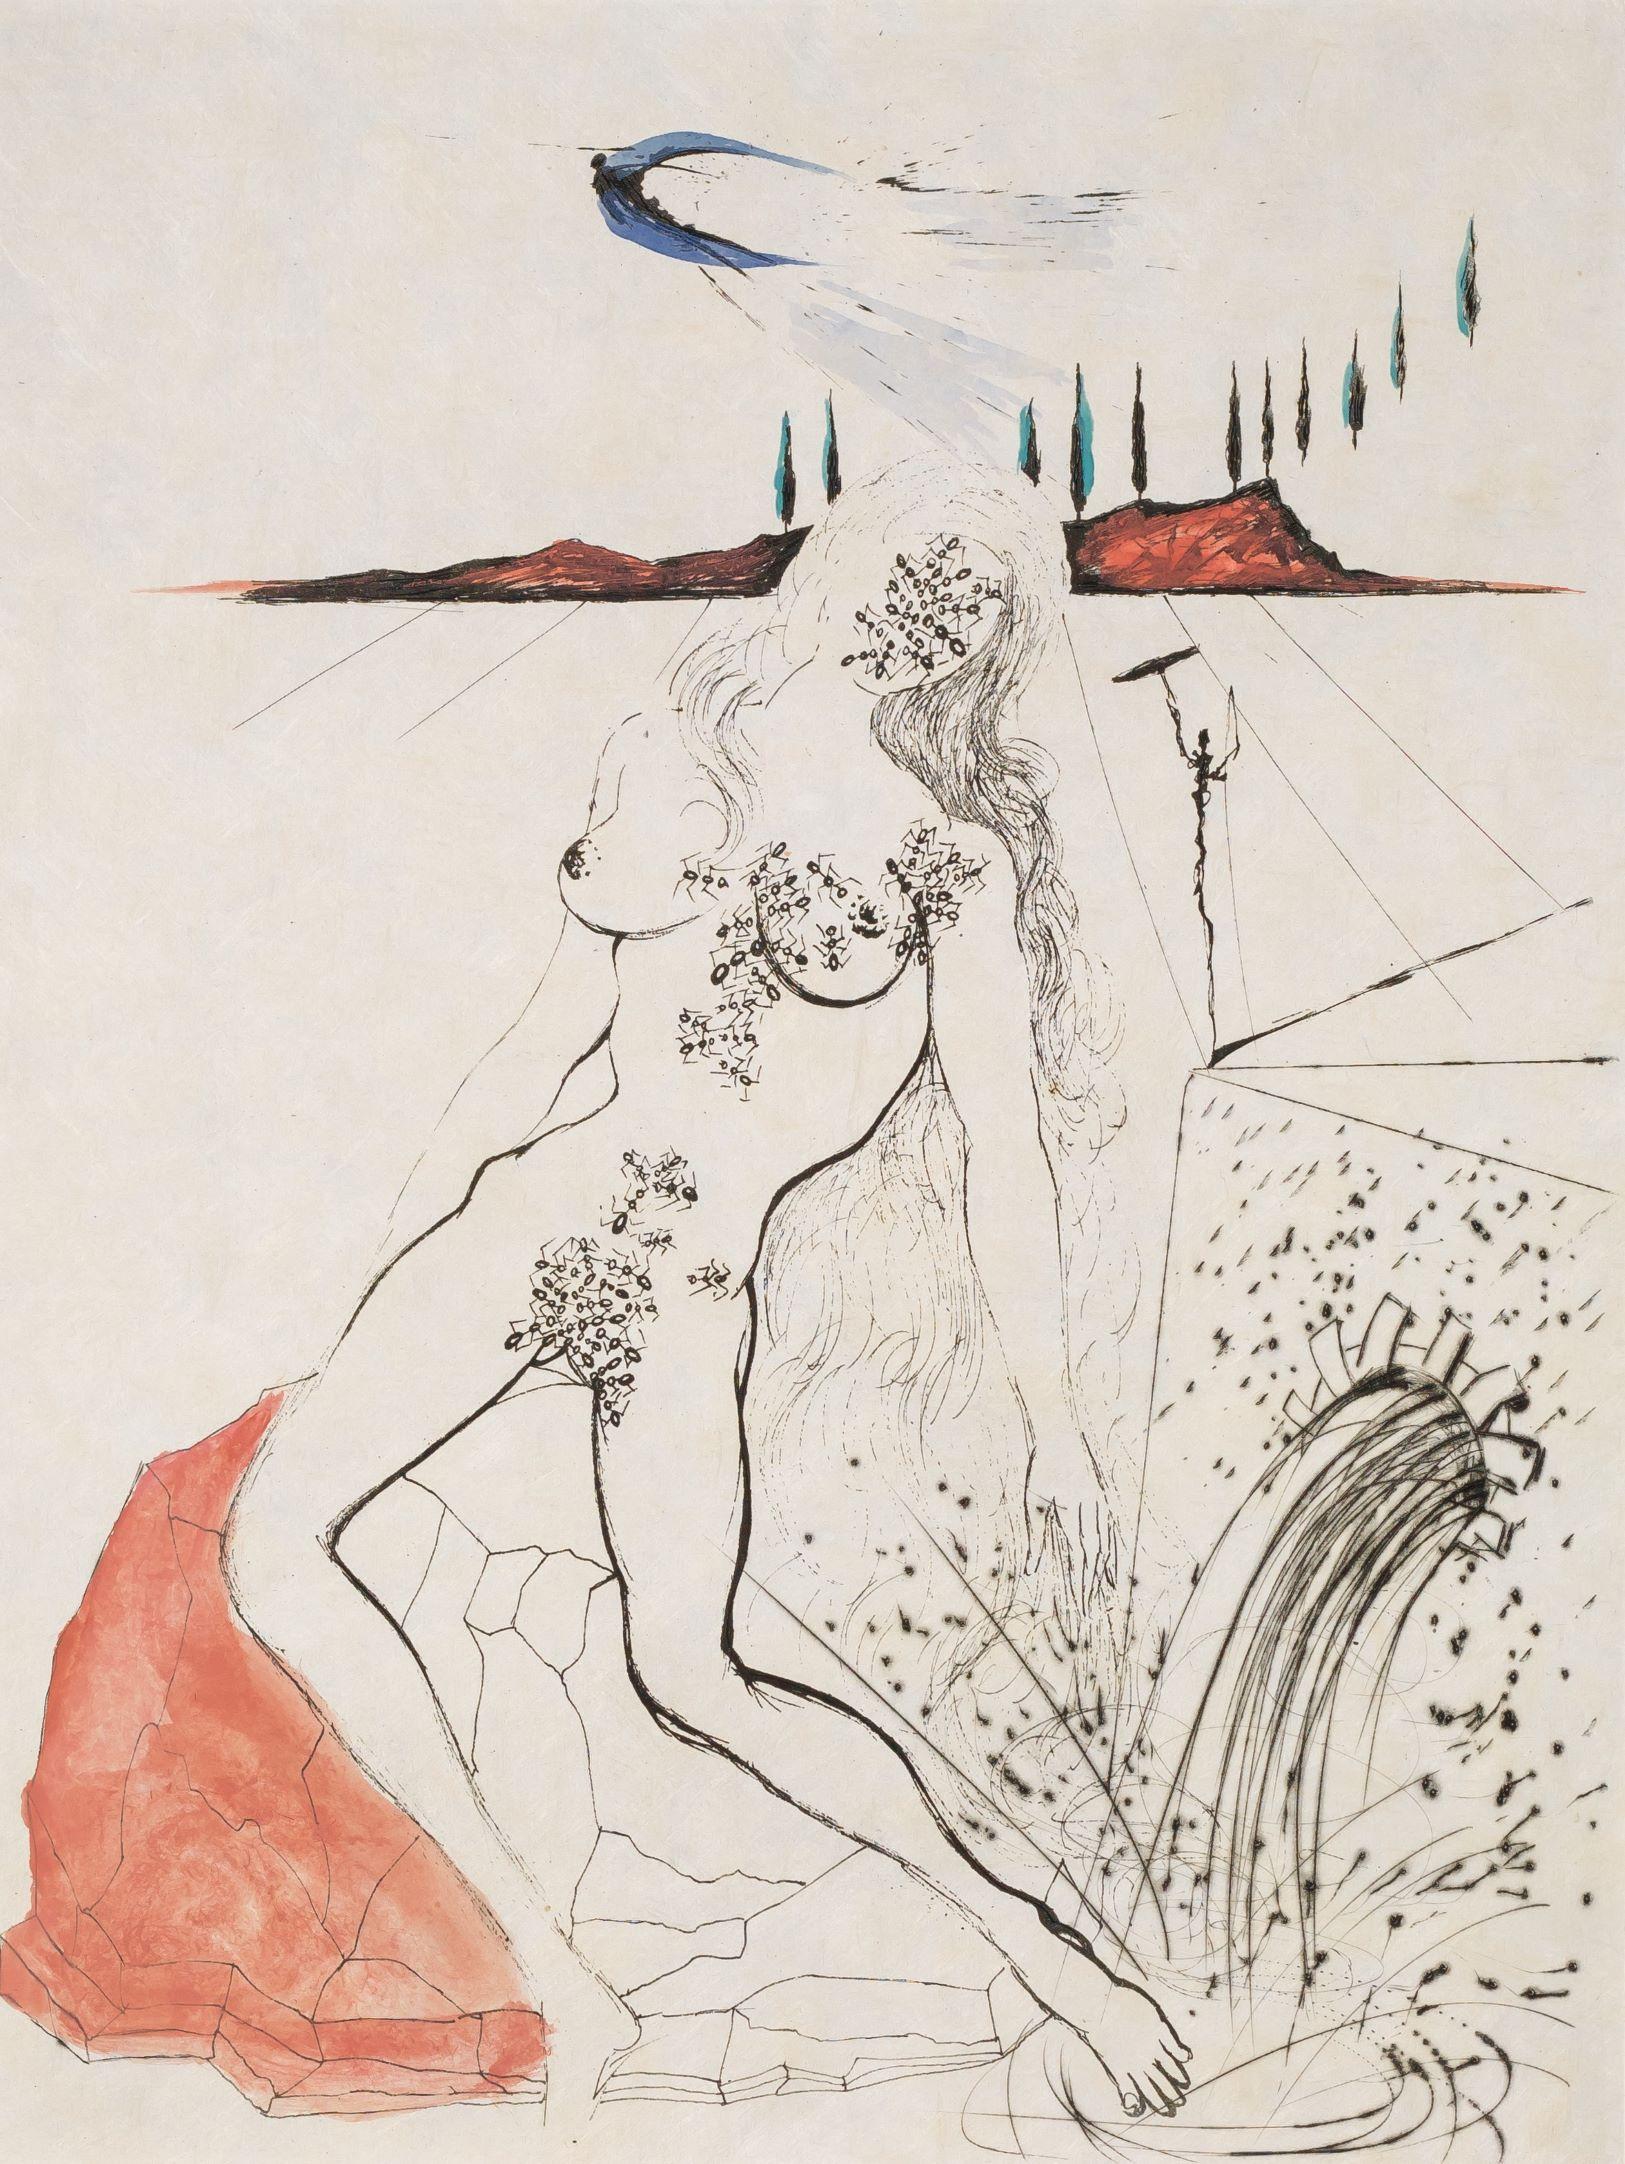 Nude at the Fountain– signed and dated ‘Dalí’ lower right and framed in an ornate, gold-tone frame. On japon, unnumbered from the 1967 edition of 235 portfolios.

Originally published as Poèmes Secrets d'Apollinaire, the etchings in this portfolio